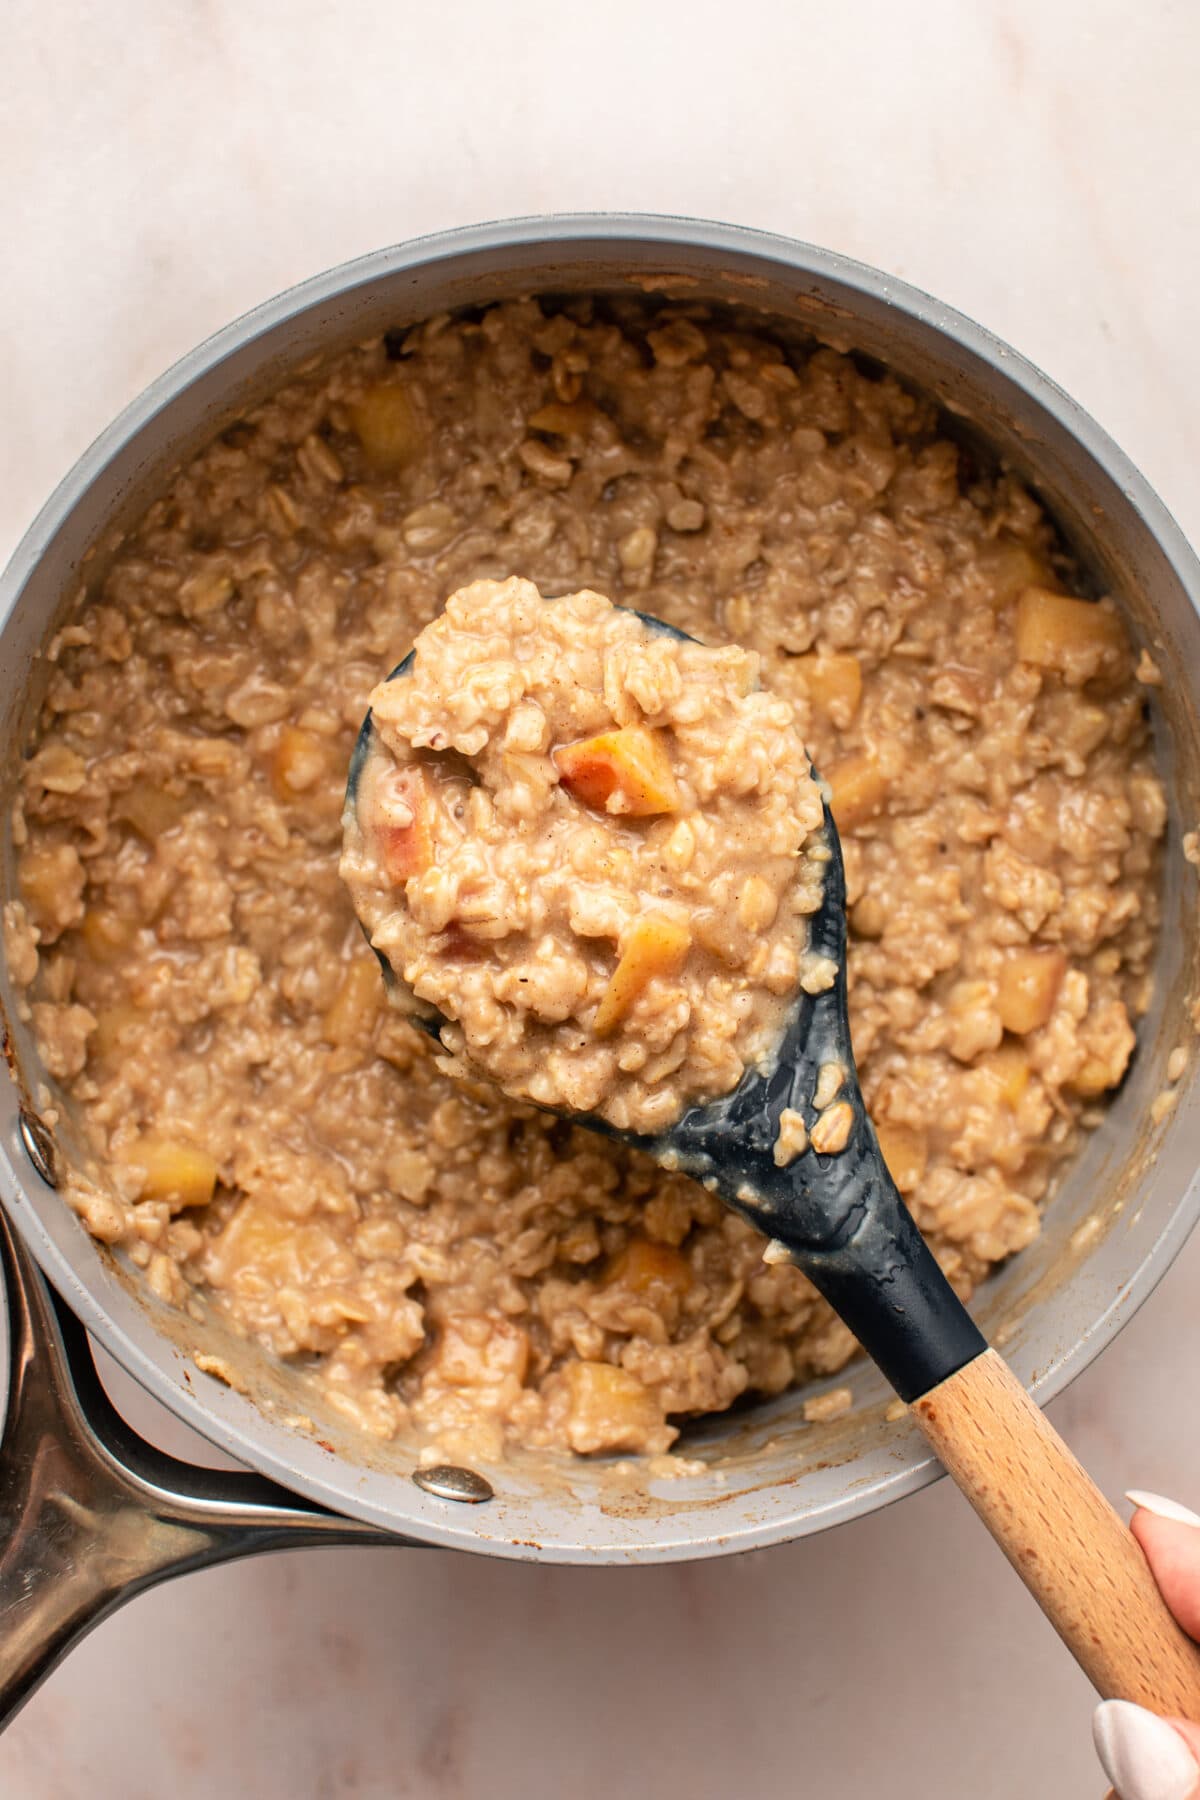 a zoomed in image on the cooked down version of the oatmeal with a serving spoon scooping up a big portion to show its texture